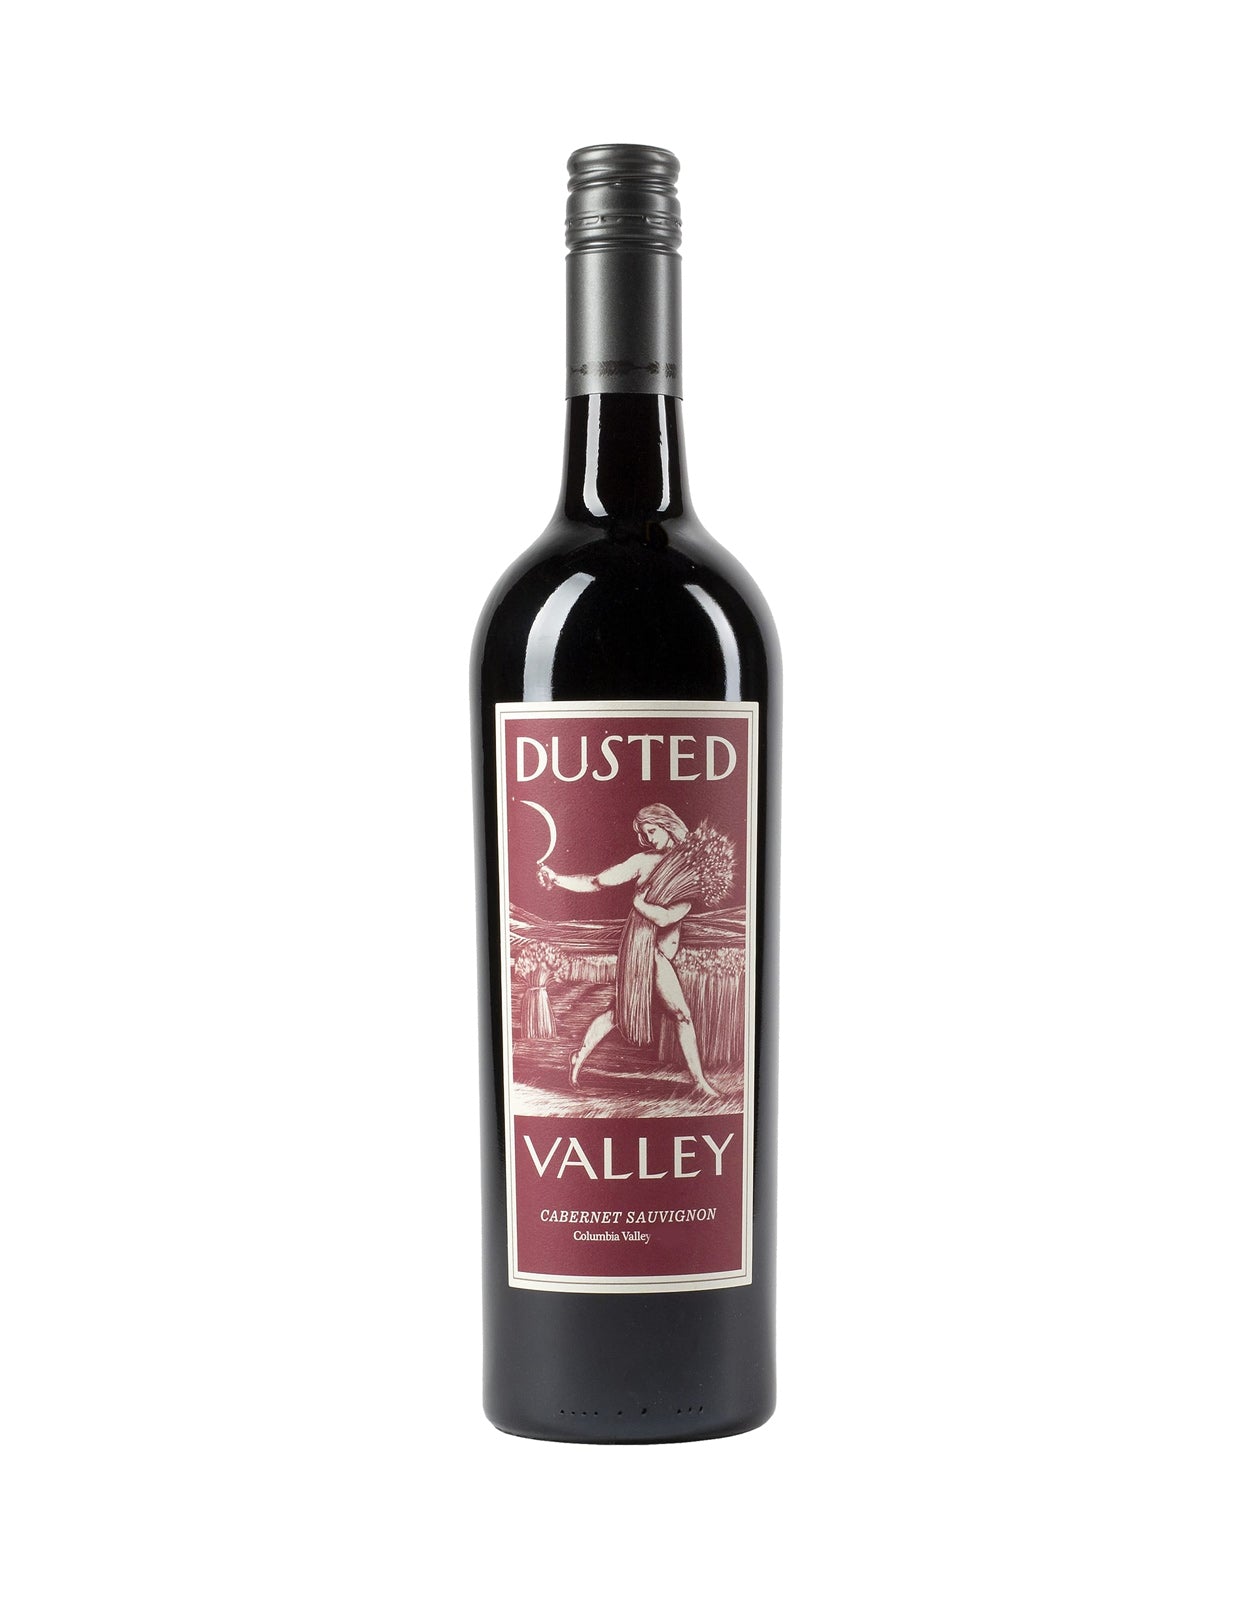 Dusted Valley Cabernet Sauvignon 2021